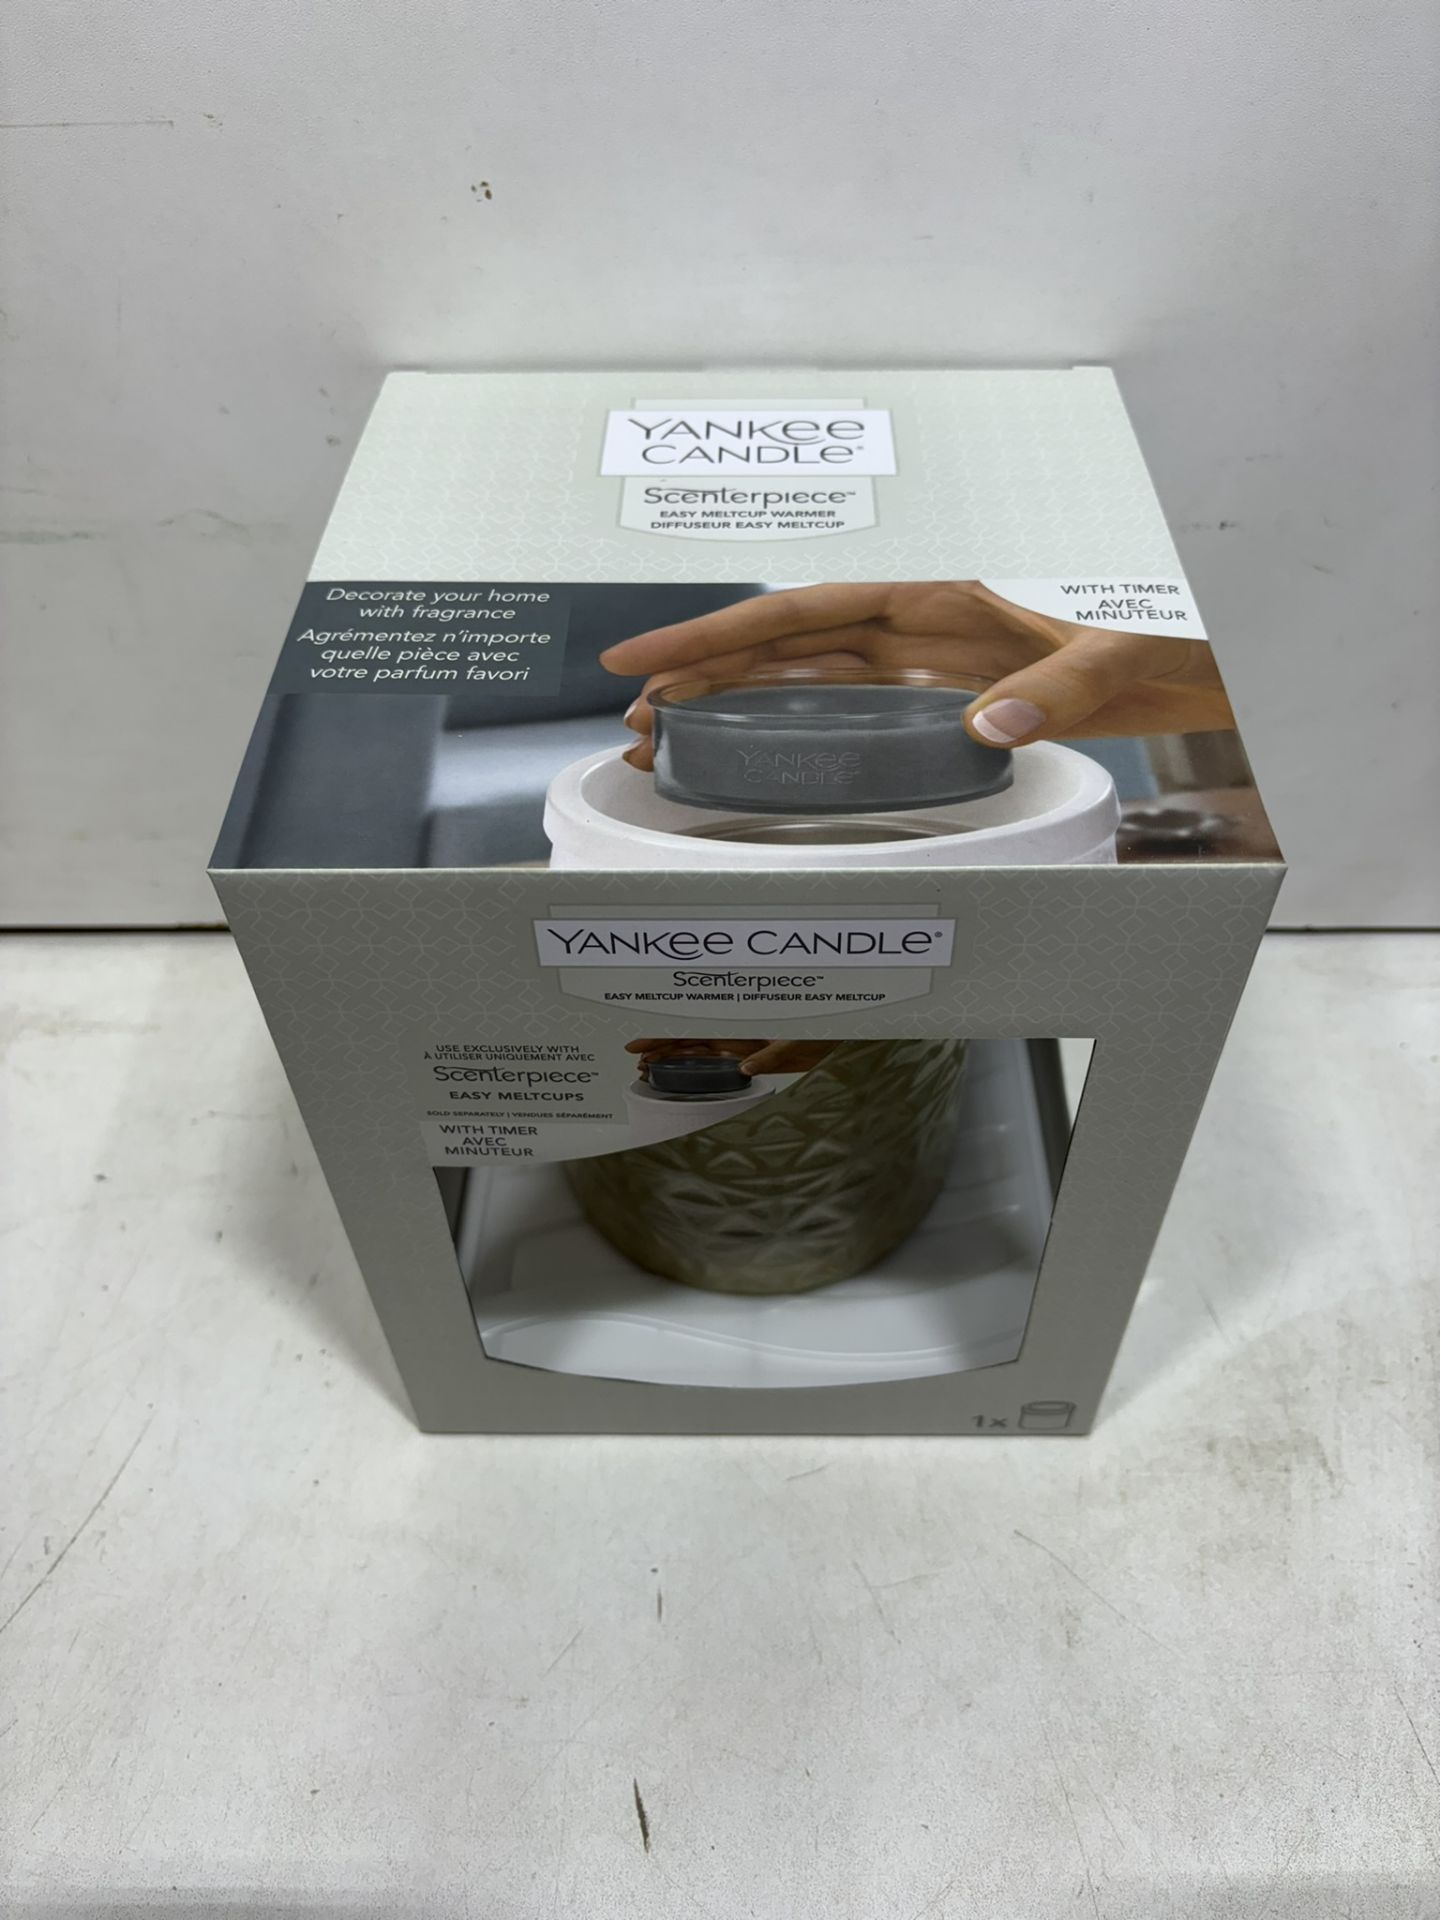 13 x Yankee Candle Belmont Ceramic Melt Cup Scenterpiece Warmers - Image 2 of 7